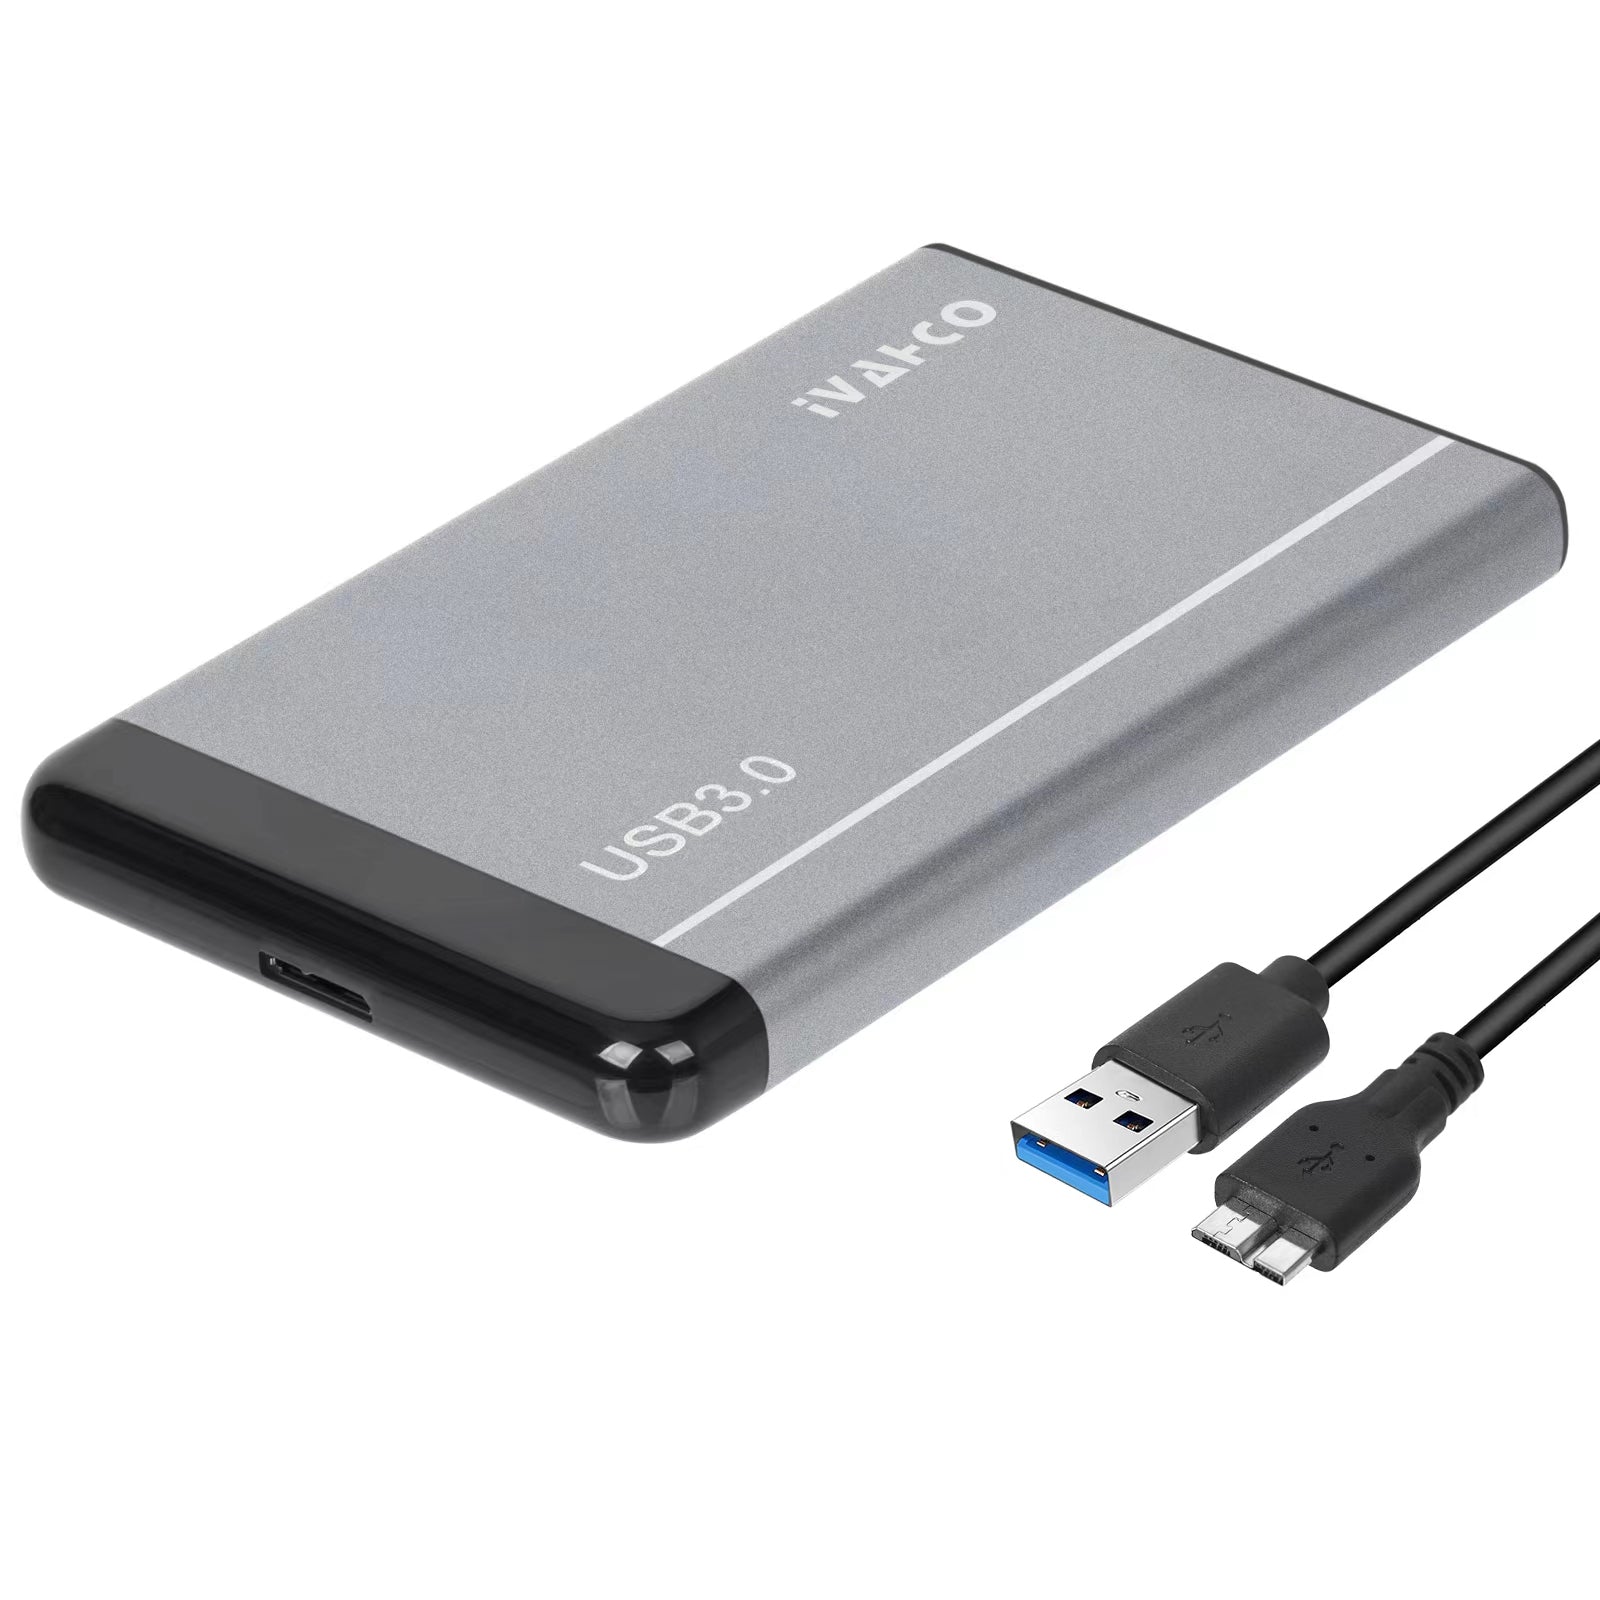 IVAHCO 750GB Matte Hard Drive Box 2.5" HDD External Case USB3.0 Hard Disk Enclosure with Data Cable - Grey